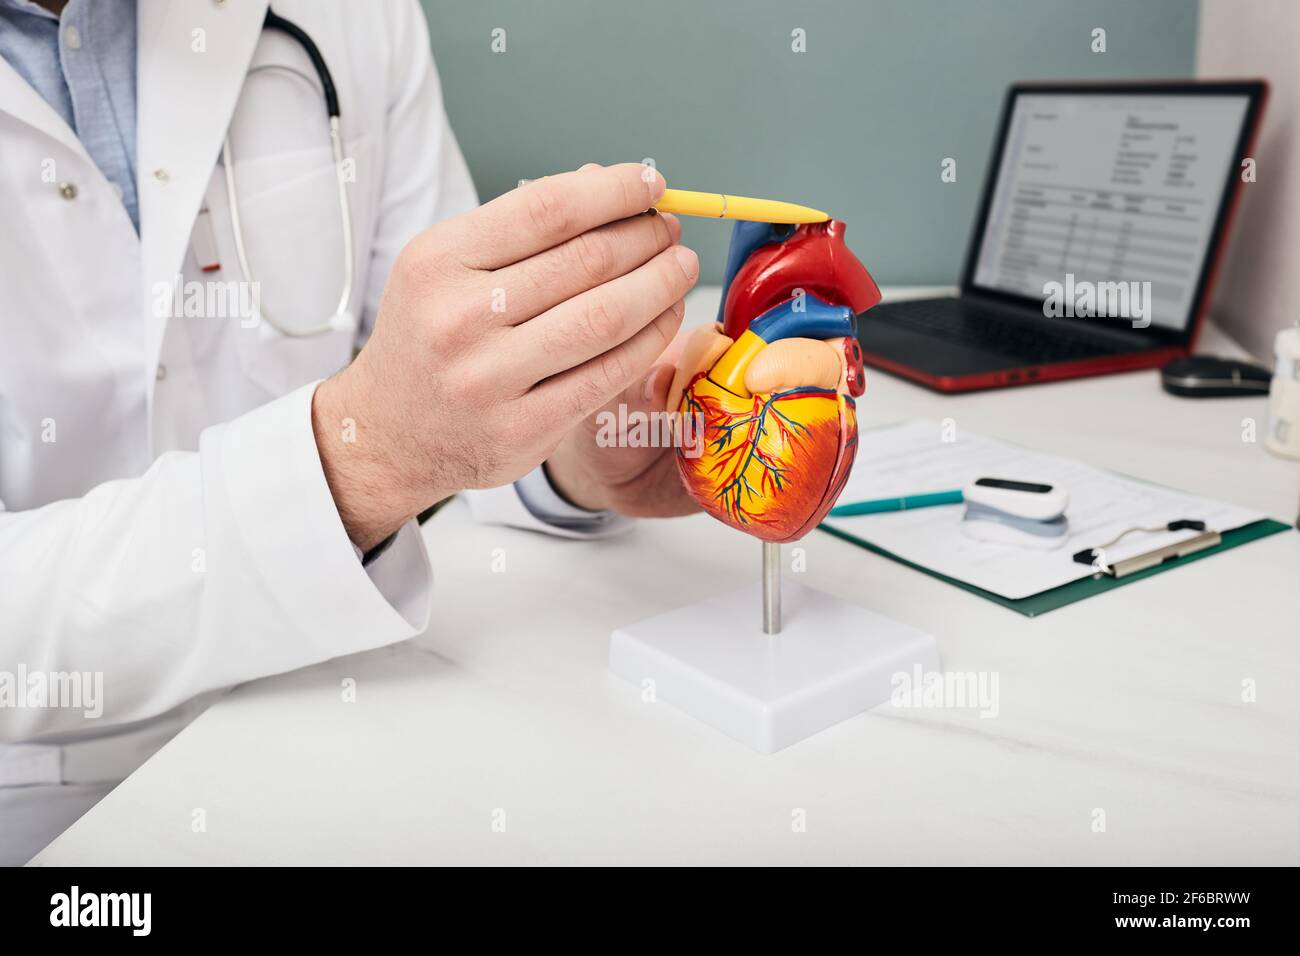 doctor showing a structure and anatomy of a human heart using a medical teaching model of a heart, pointing with a pen to aorta Stock Photo